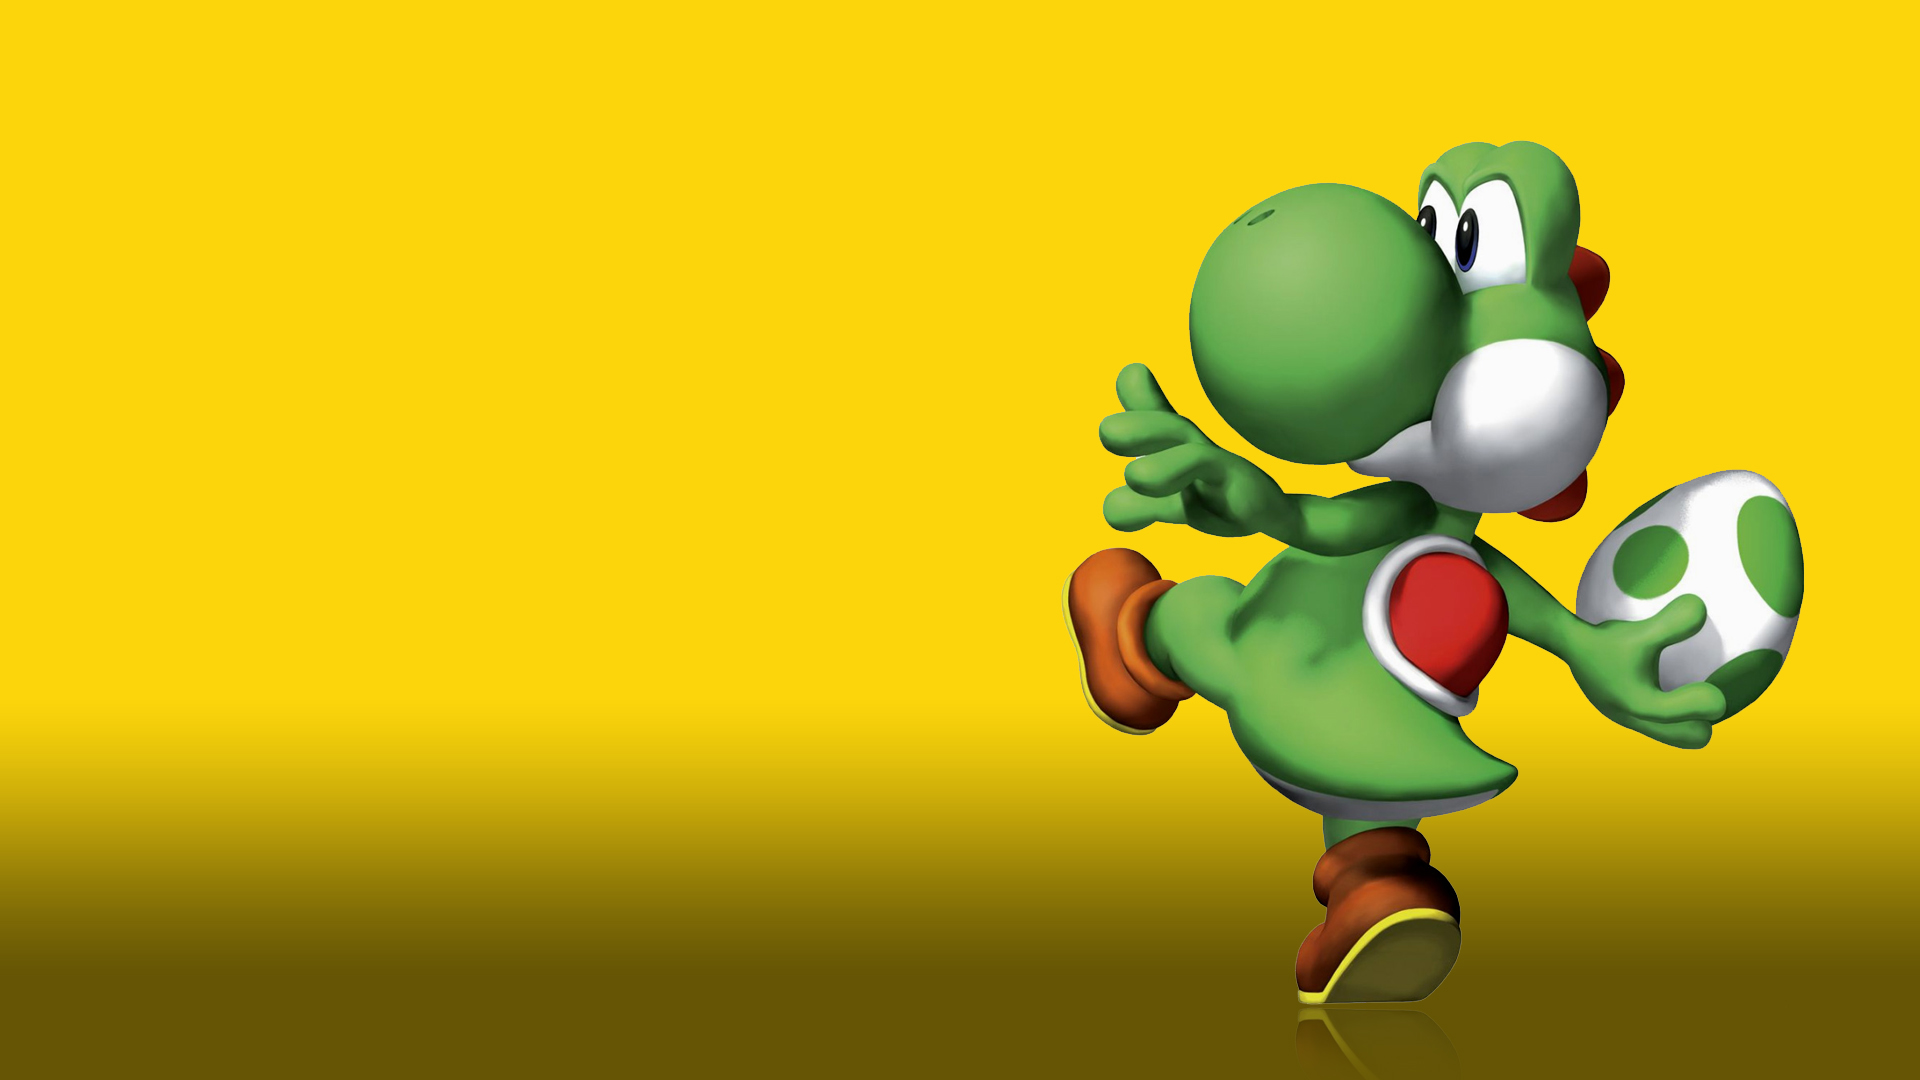 Yoshi Wallpapers for PC, HVGA 3:2, TGW P 88 Wallpapers